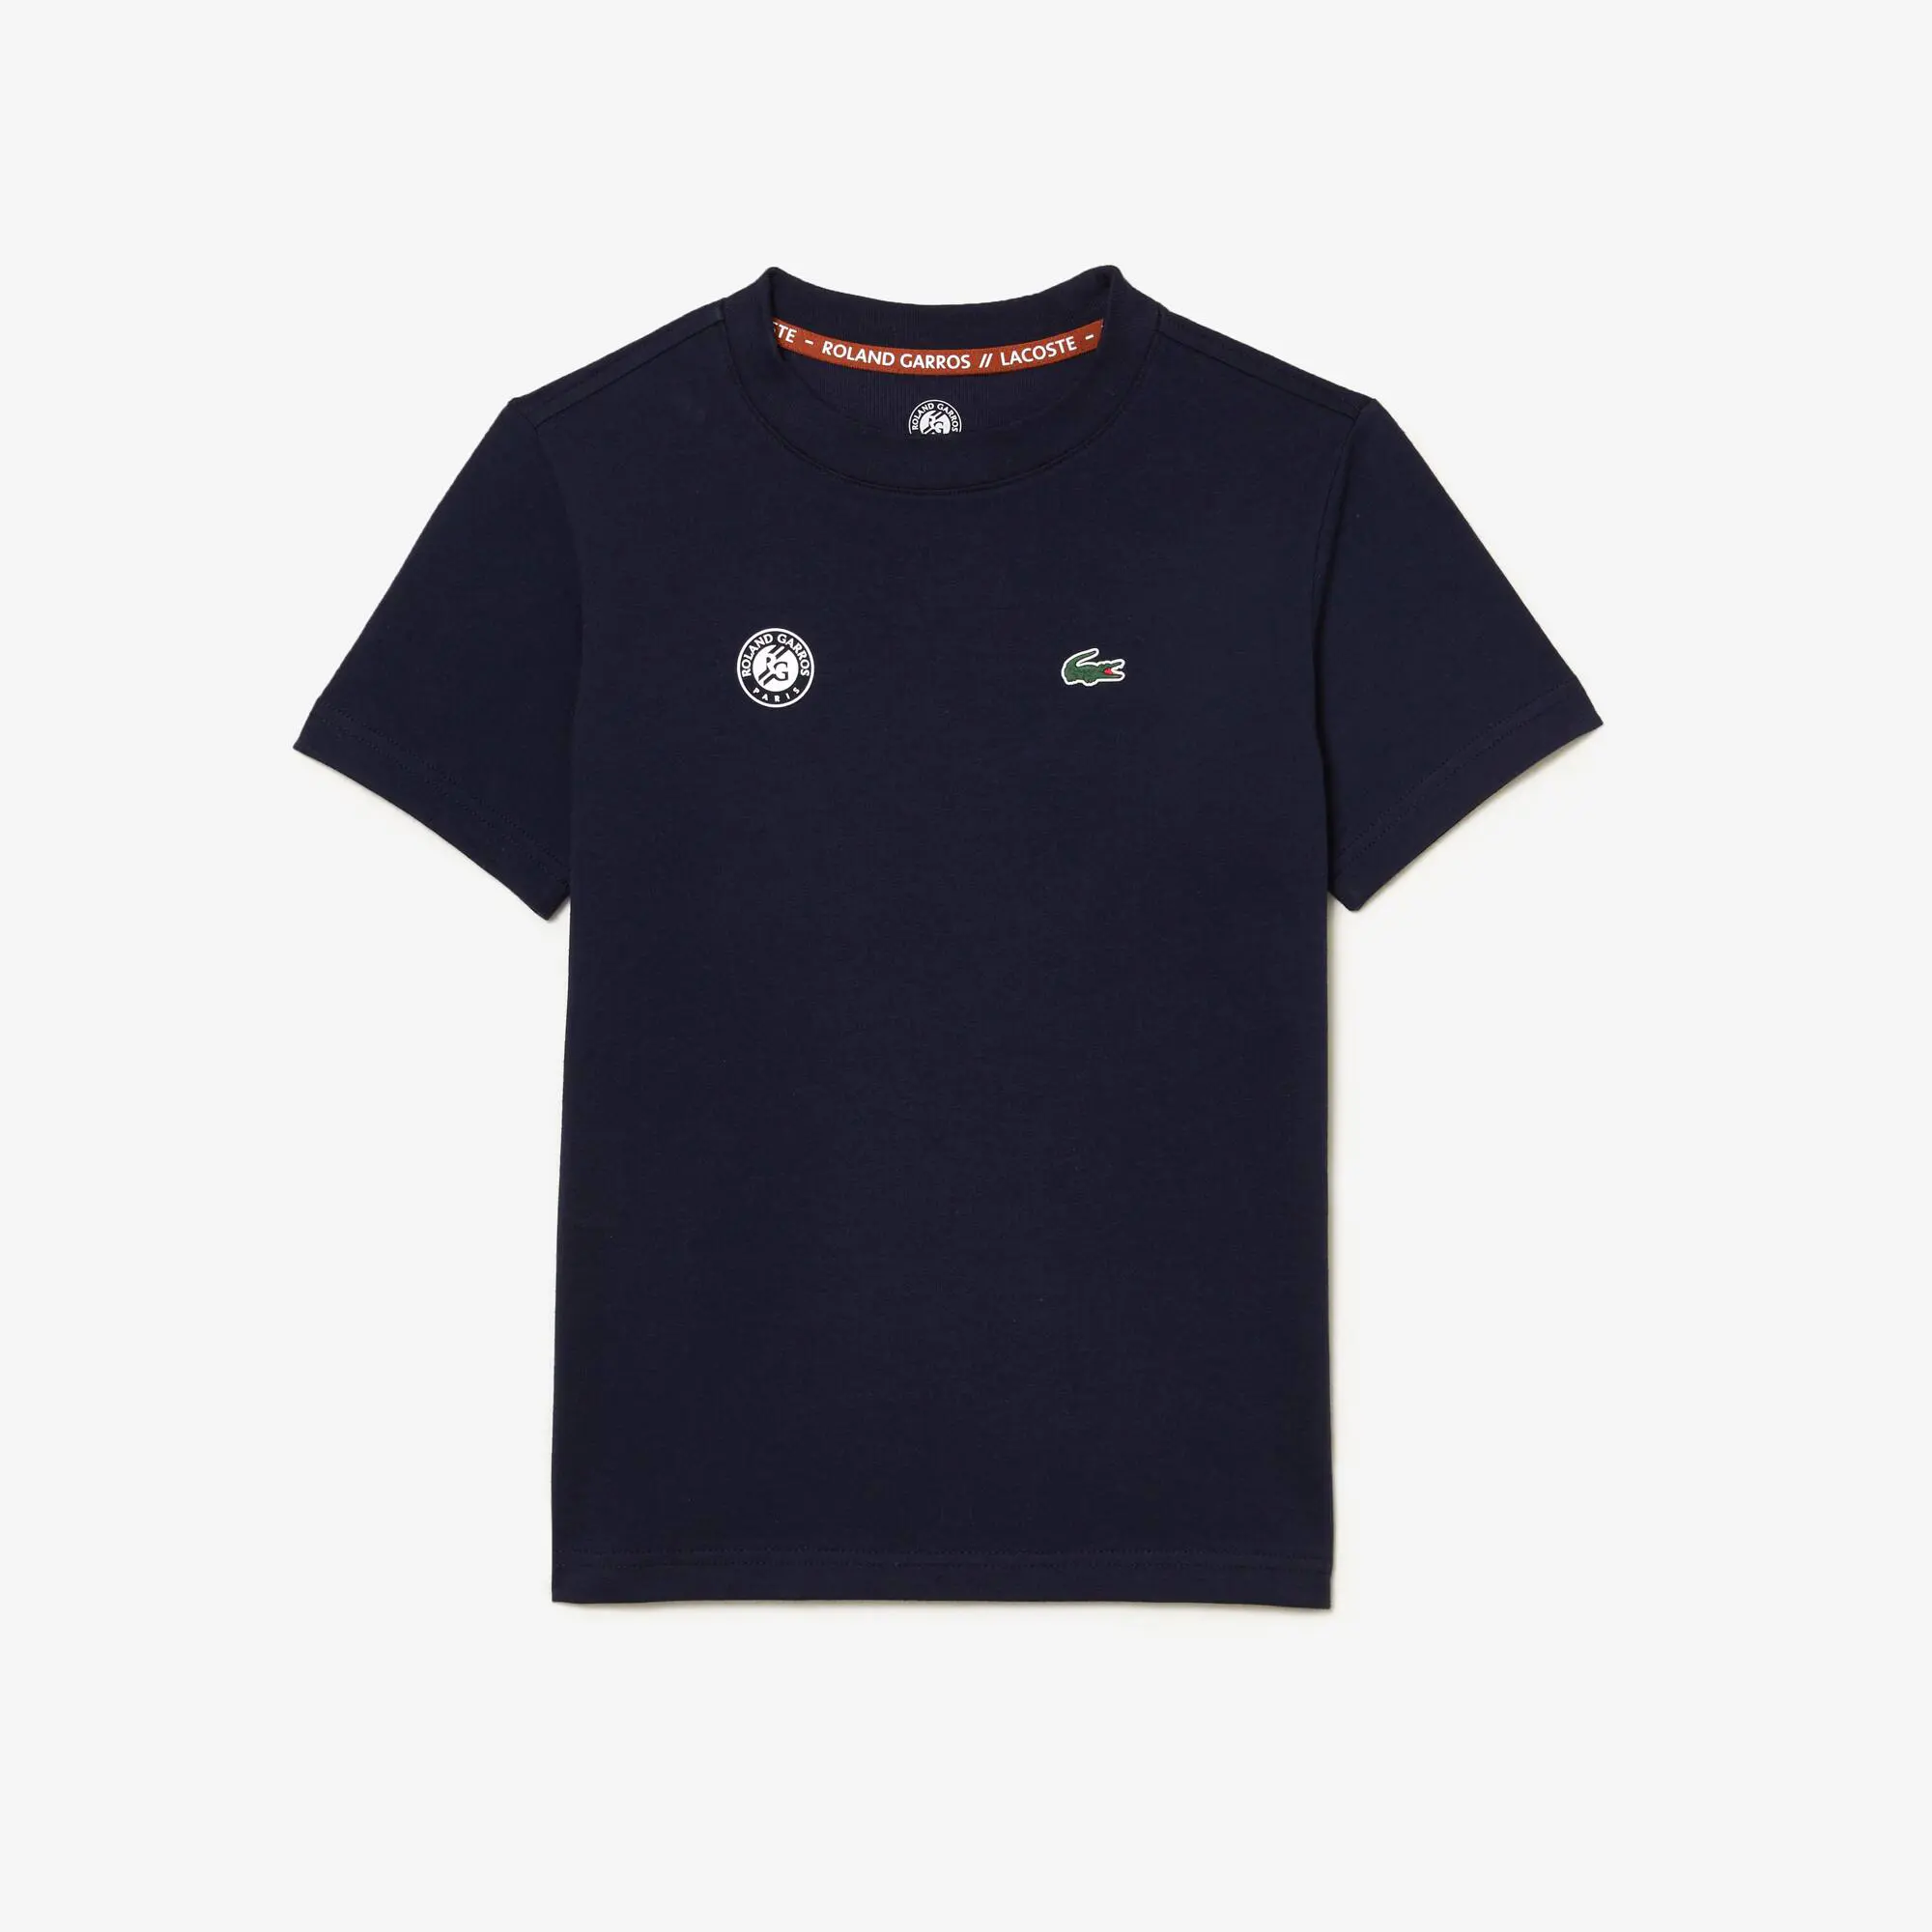 Lacoste Kids' Roland Garros Edition Performance Ultra-Dry Jersey T-shirt. 2